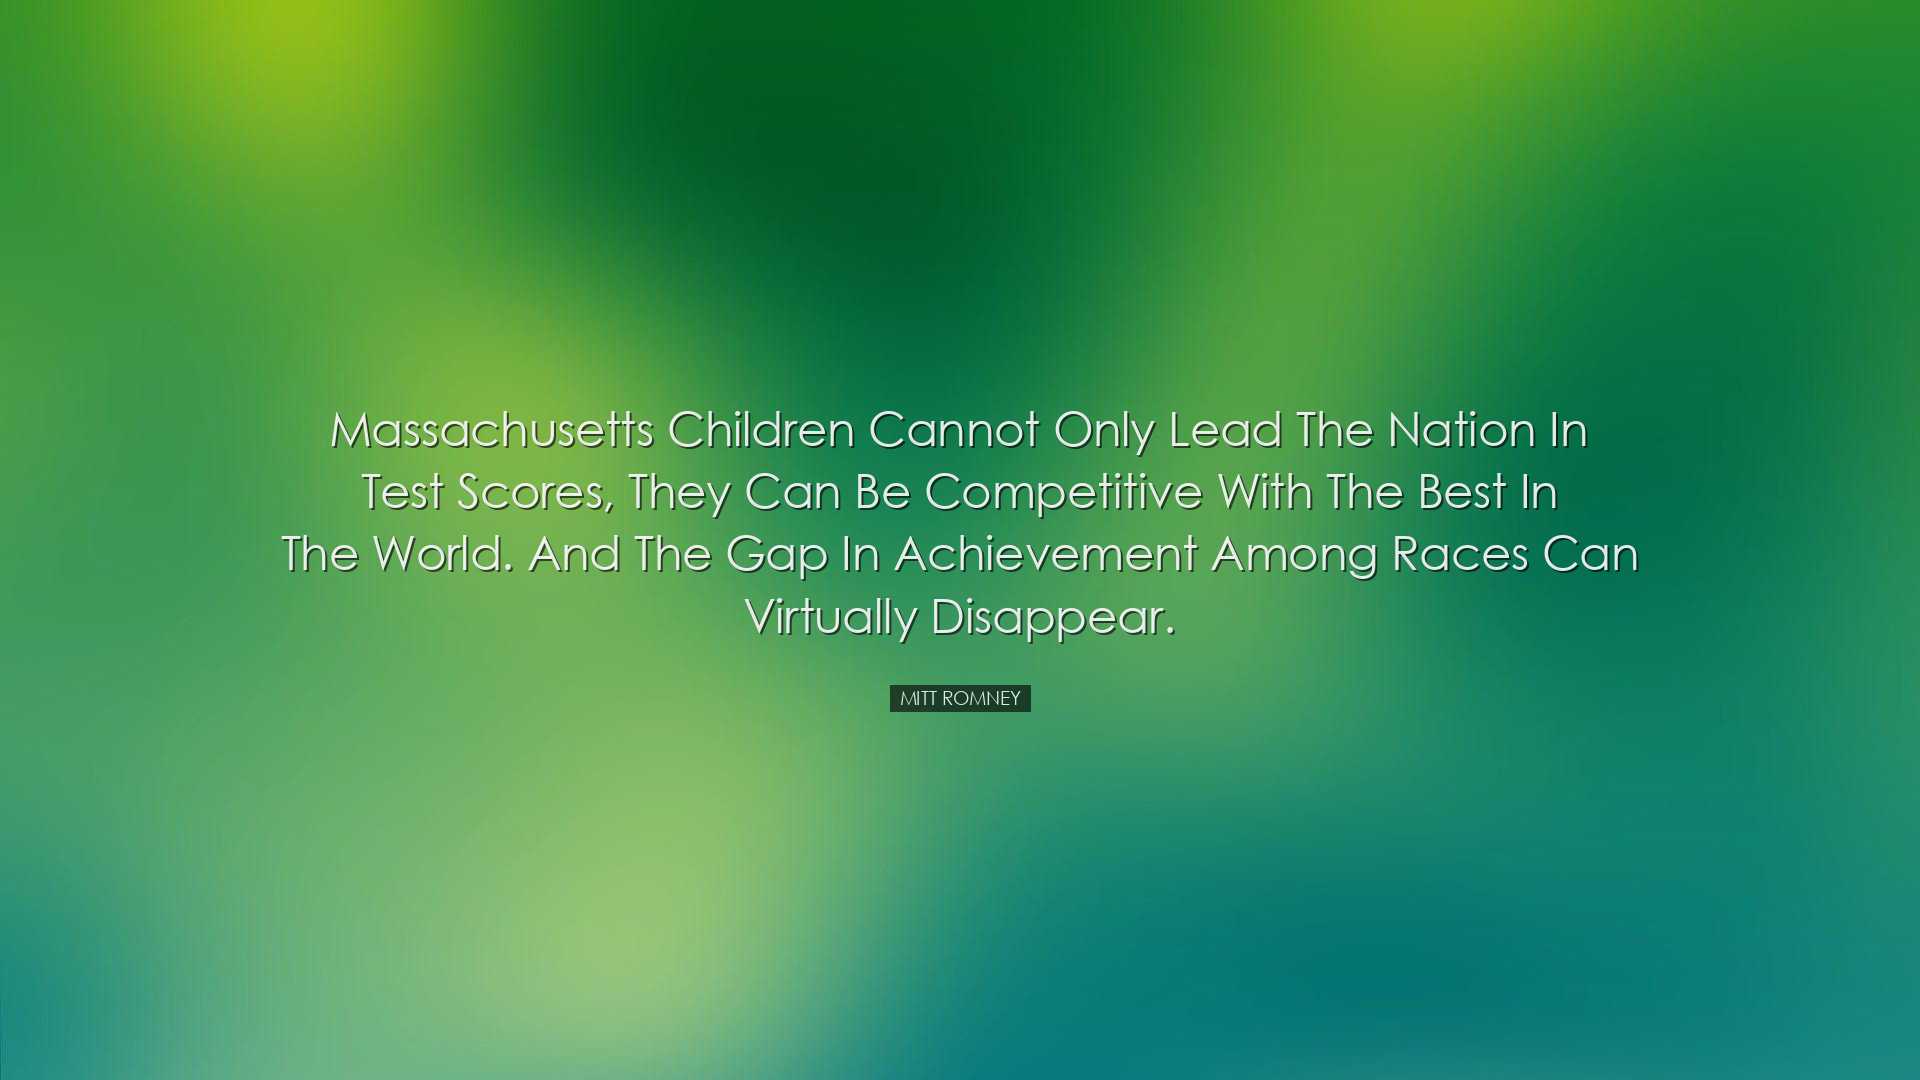 Massachusetts children cannot only lead the nation in test scores,